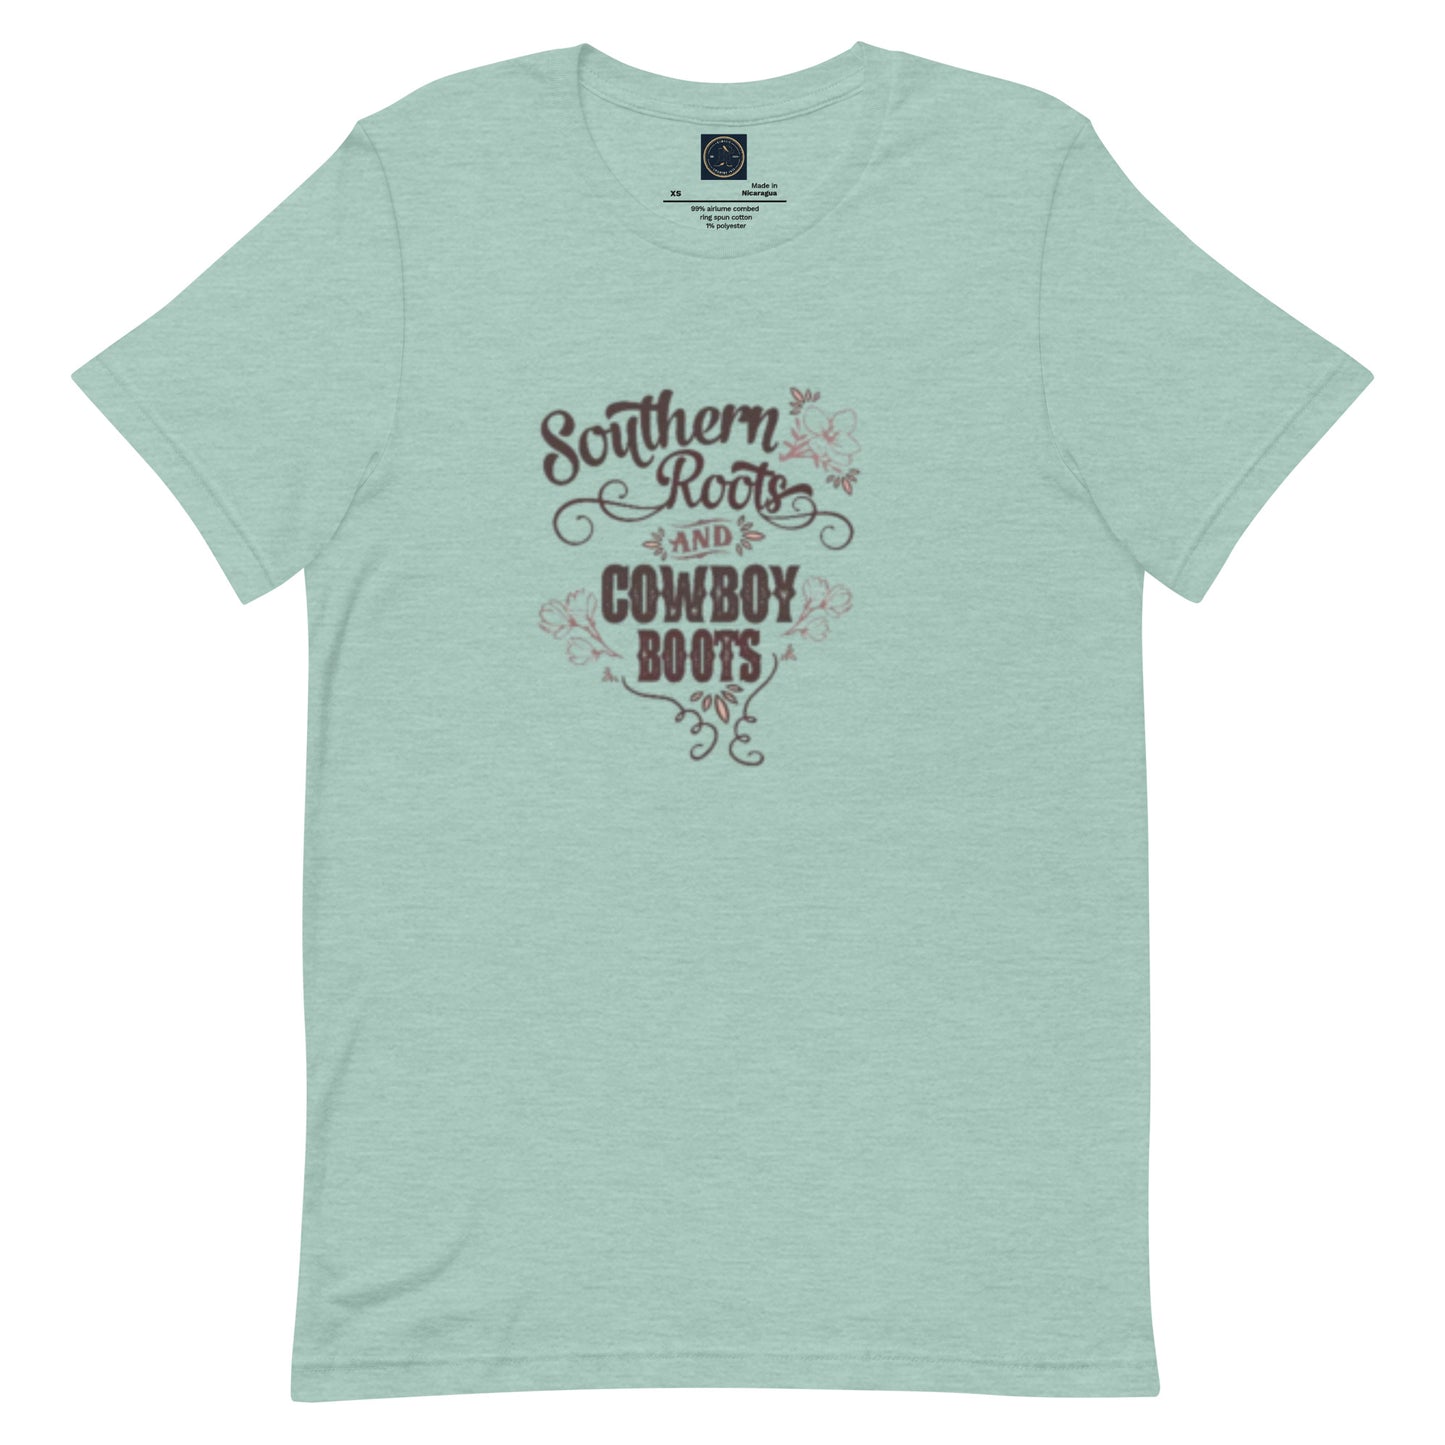 Roots & Boots - Classic Country Tees